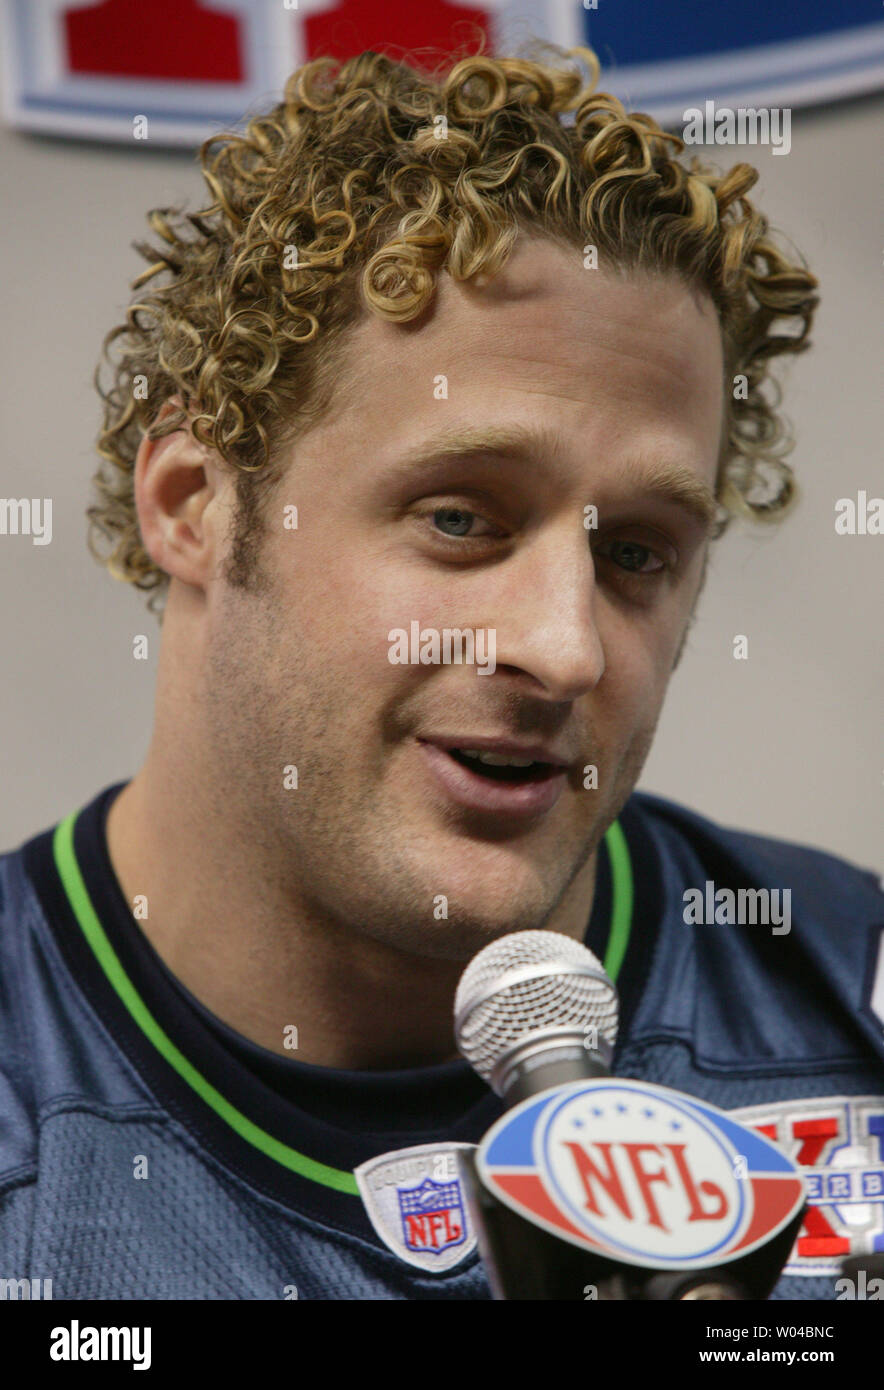 Seahawks defensive end Grant Wistrom answers questions from the media during the Seattle Seahawks' Super Bowl XL Media Day at Ford Field in Detroit on January 31, 2006. The Pittsburgh Steelers will play the Seattle Seahawks in the championship game on February 5.   (UPI Photo/Bruce Gordon) Stock Photo